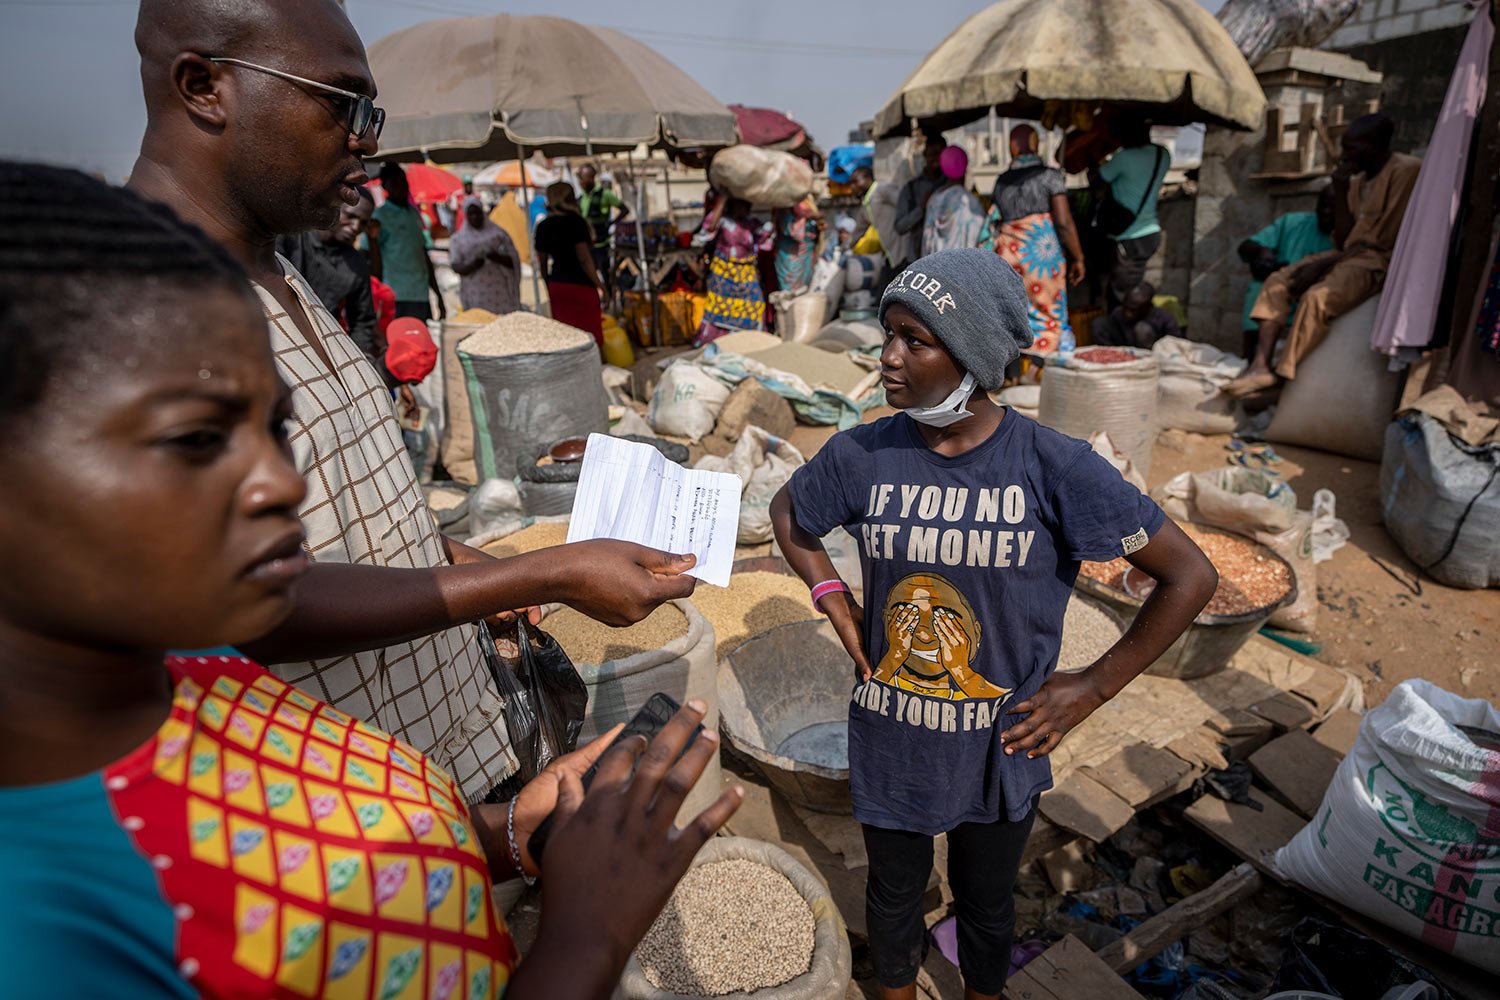  A customer buying a small bag of melon seeds discusses how he will send a bank transfer to the street seller, right, due to the crisis in the supply of banknotes, at the bi-weekly Karmo street market in Abuja, Nigeria Tuesday, Feb. 28, 2023. Writing